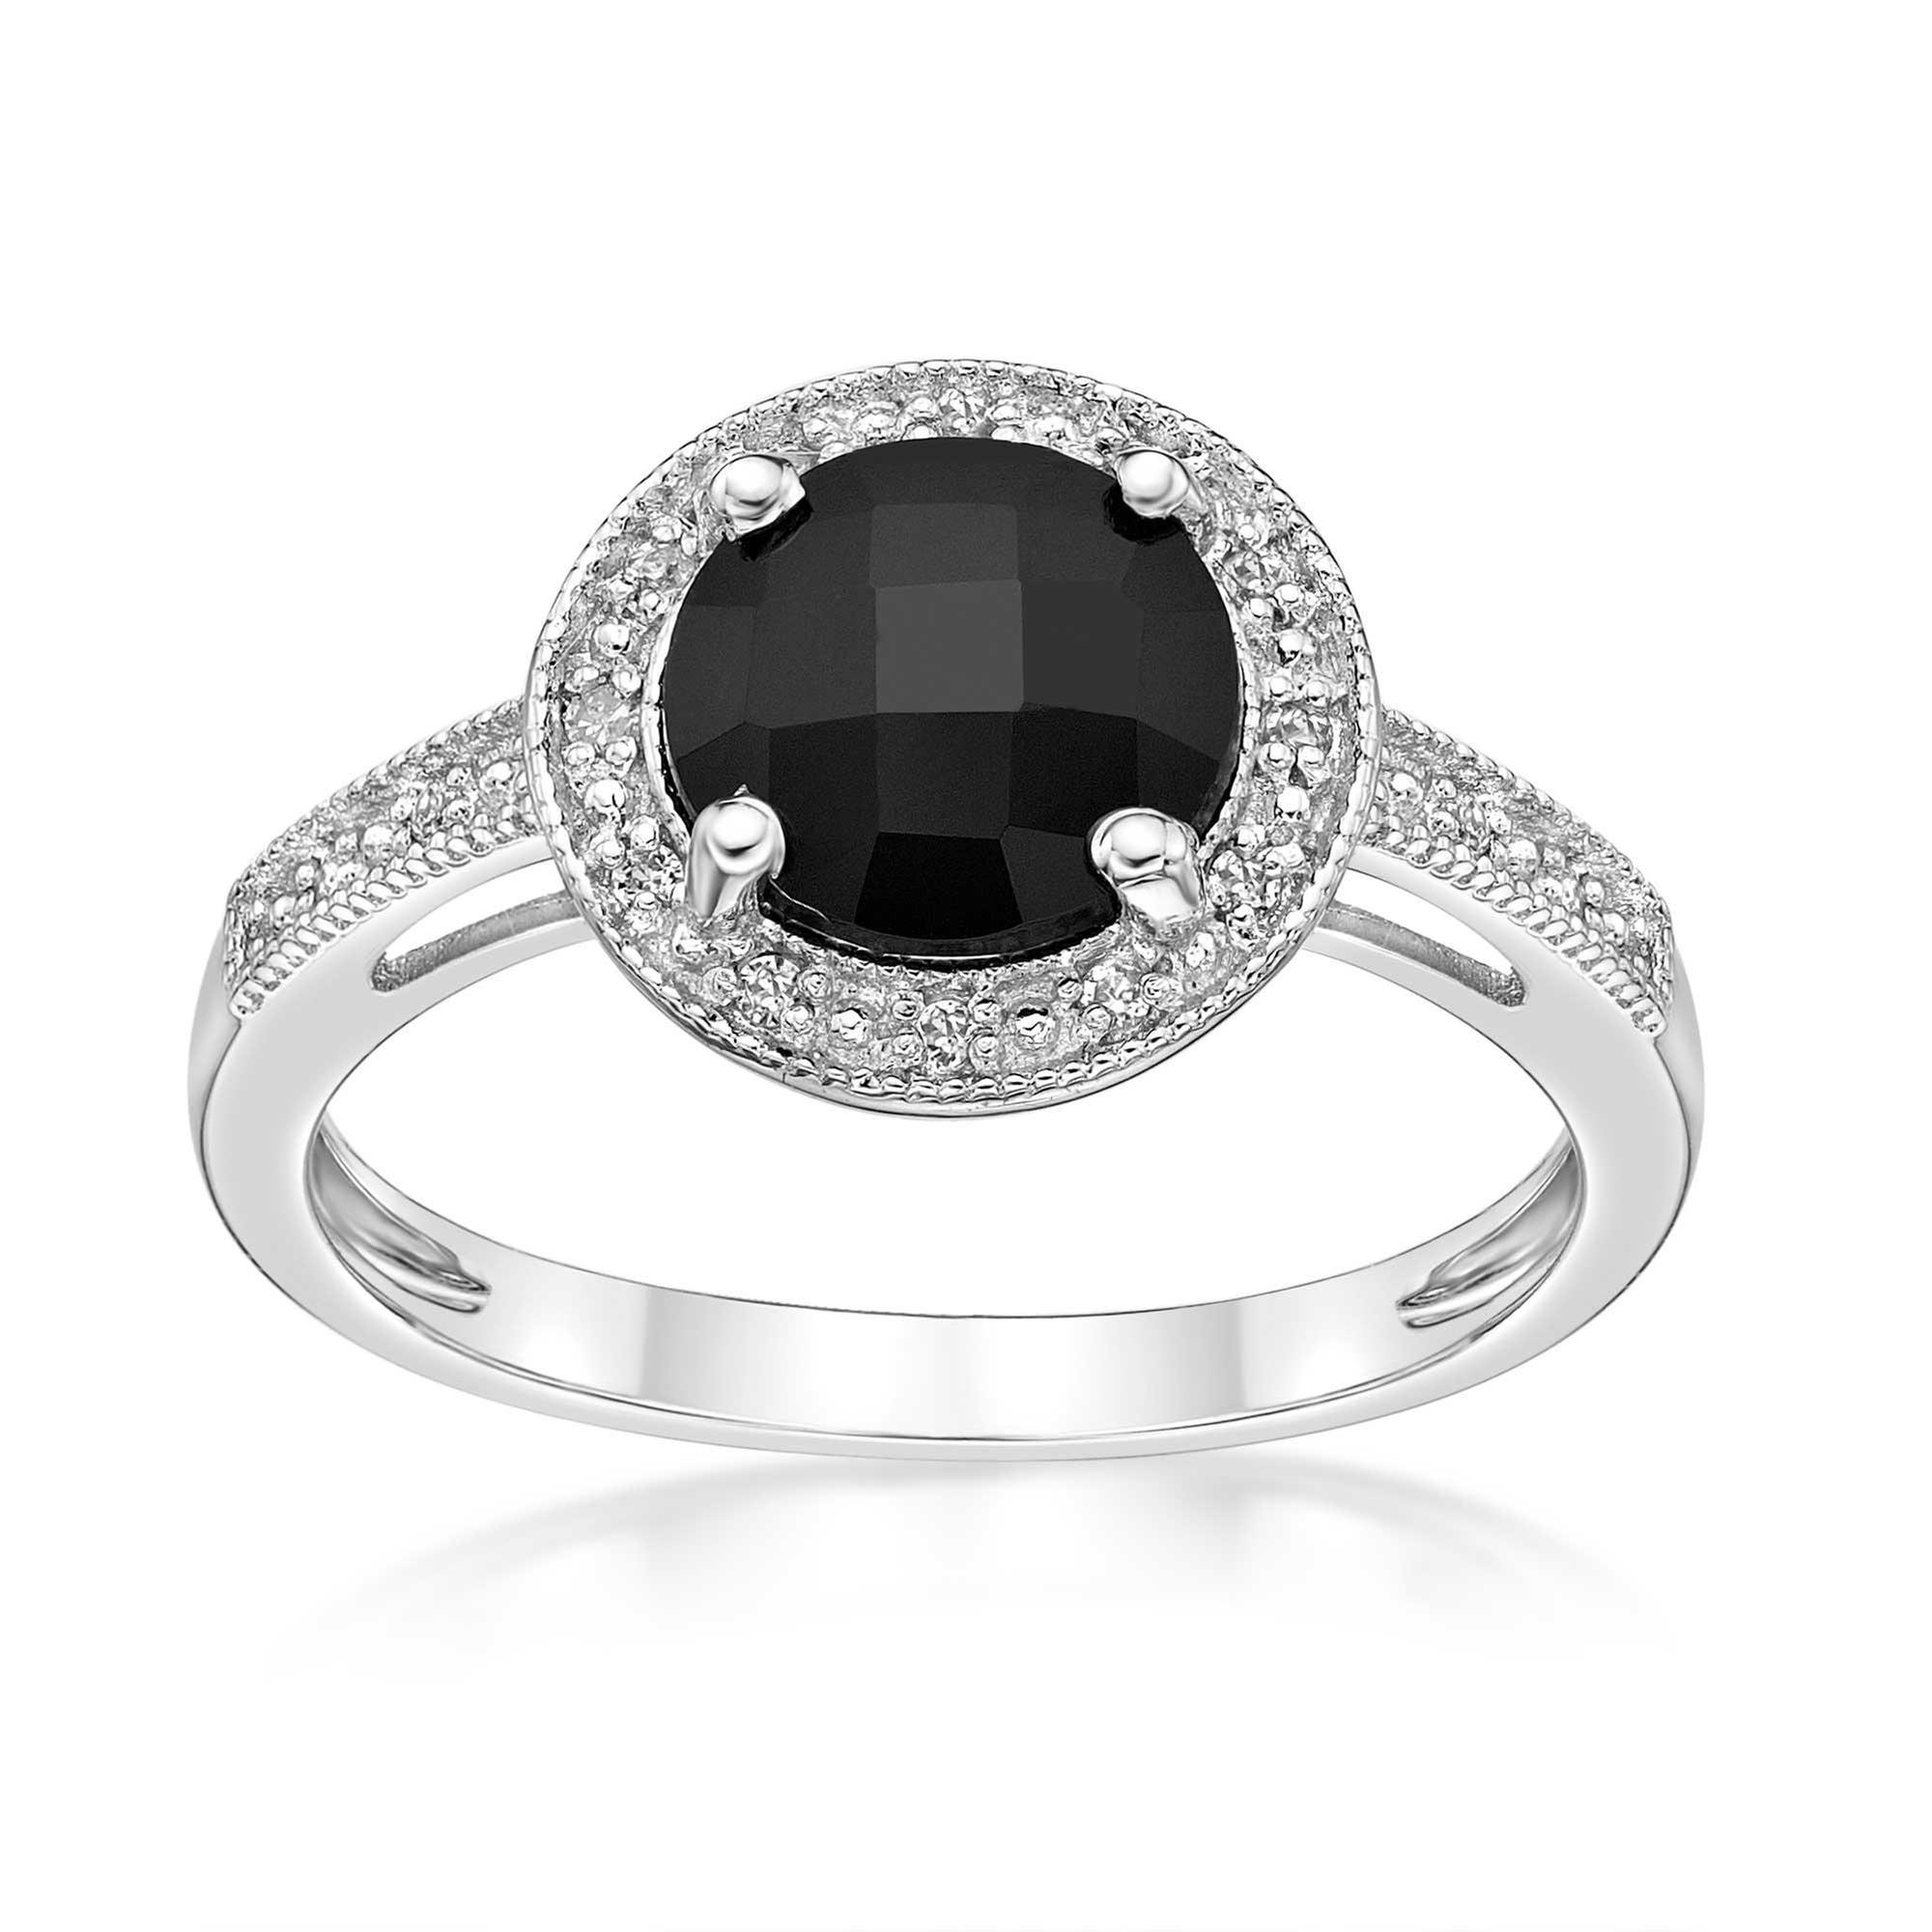 Round Black Onyx, Created White Sapphire and Diamond Accent Halo Ring - Size 9